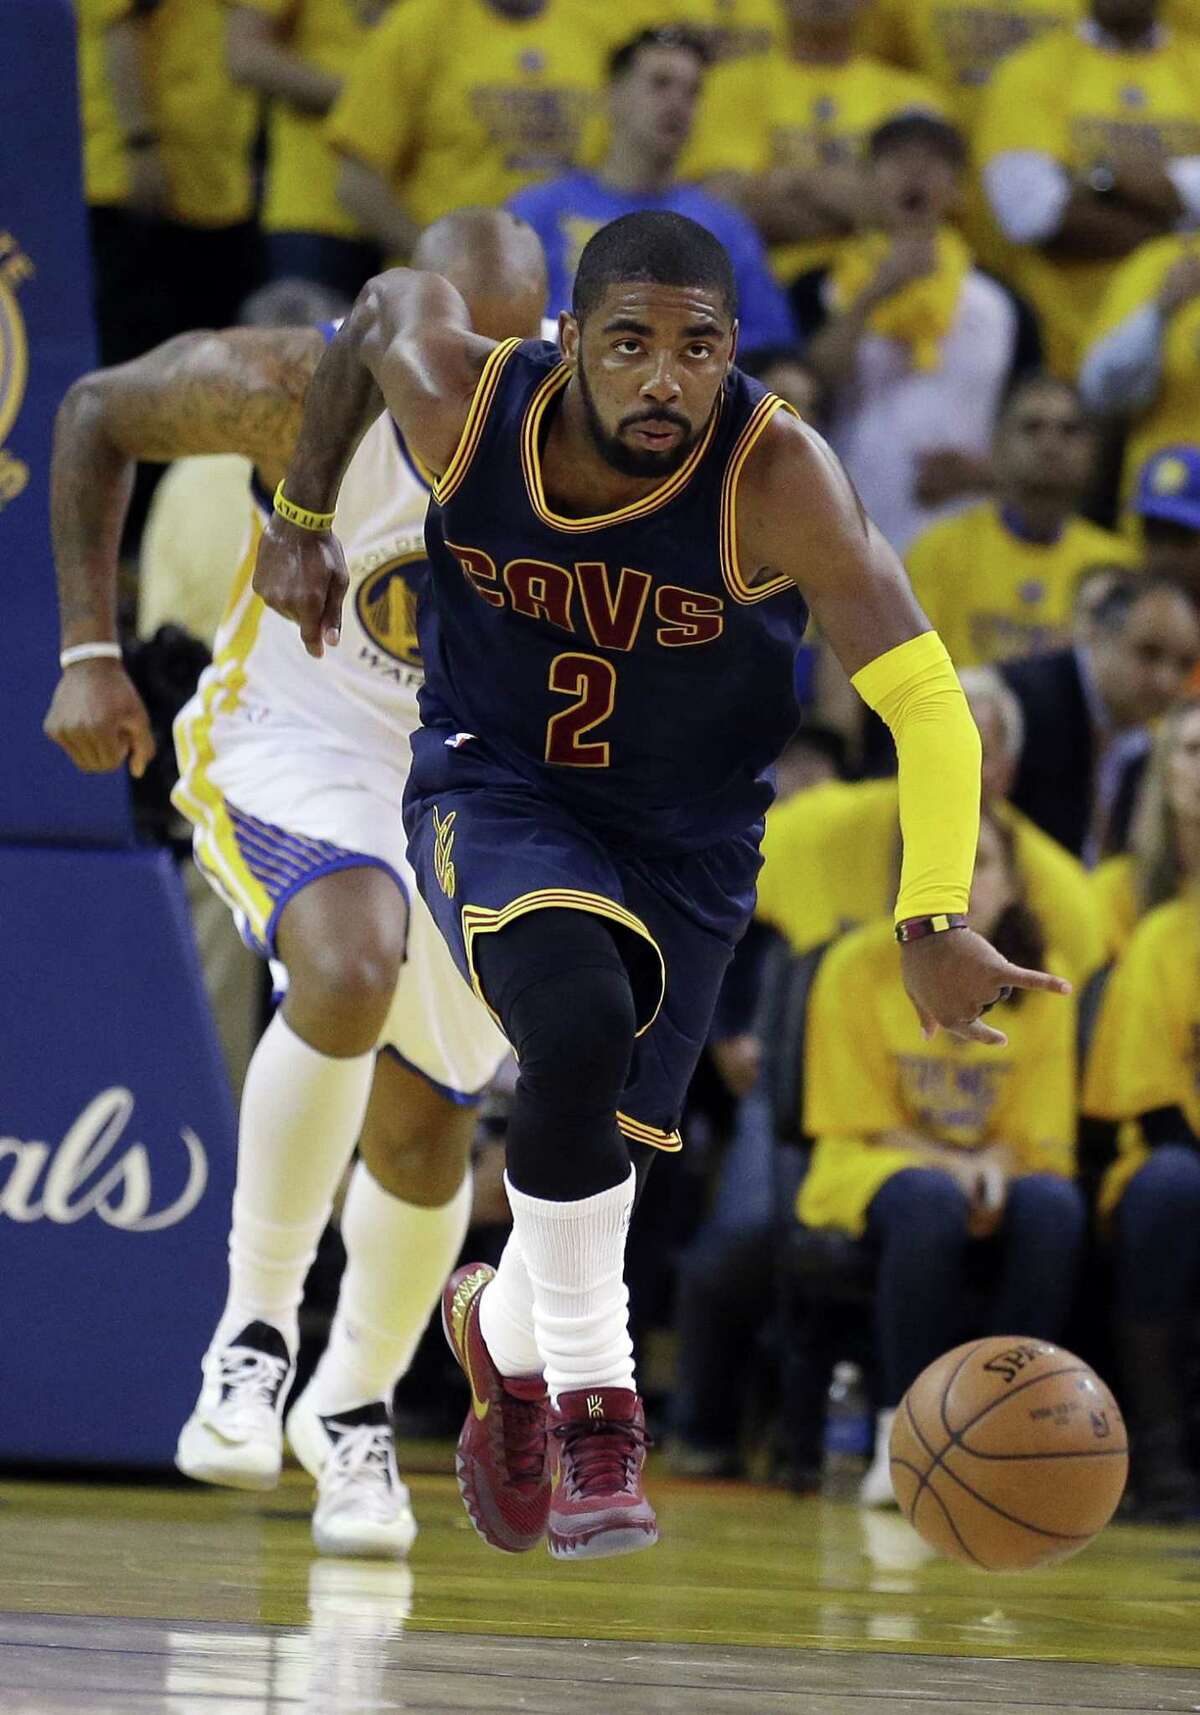 Cleveland Cavaliers guard Kyrie Irving dribbles up the floor against the Golden State Warriors during Game 1 of the NBA Finals on Thursday night in Oakland, Calif.